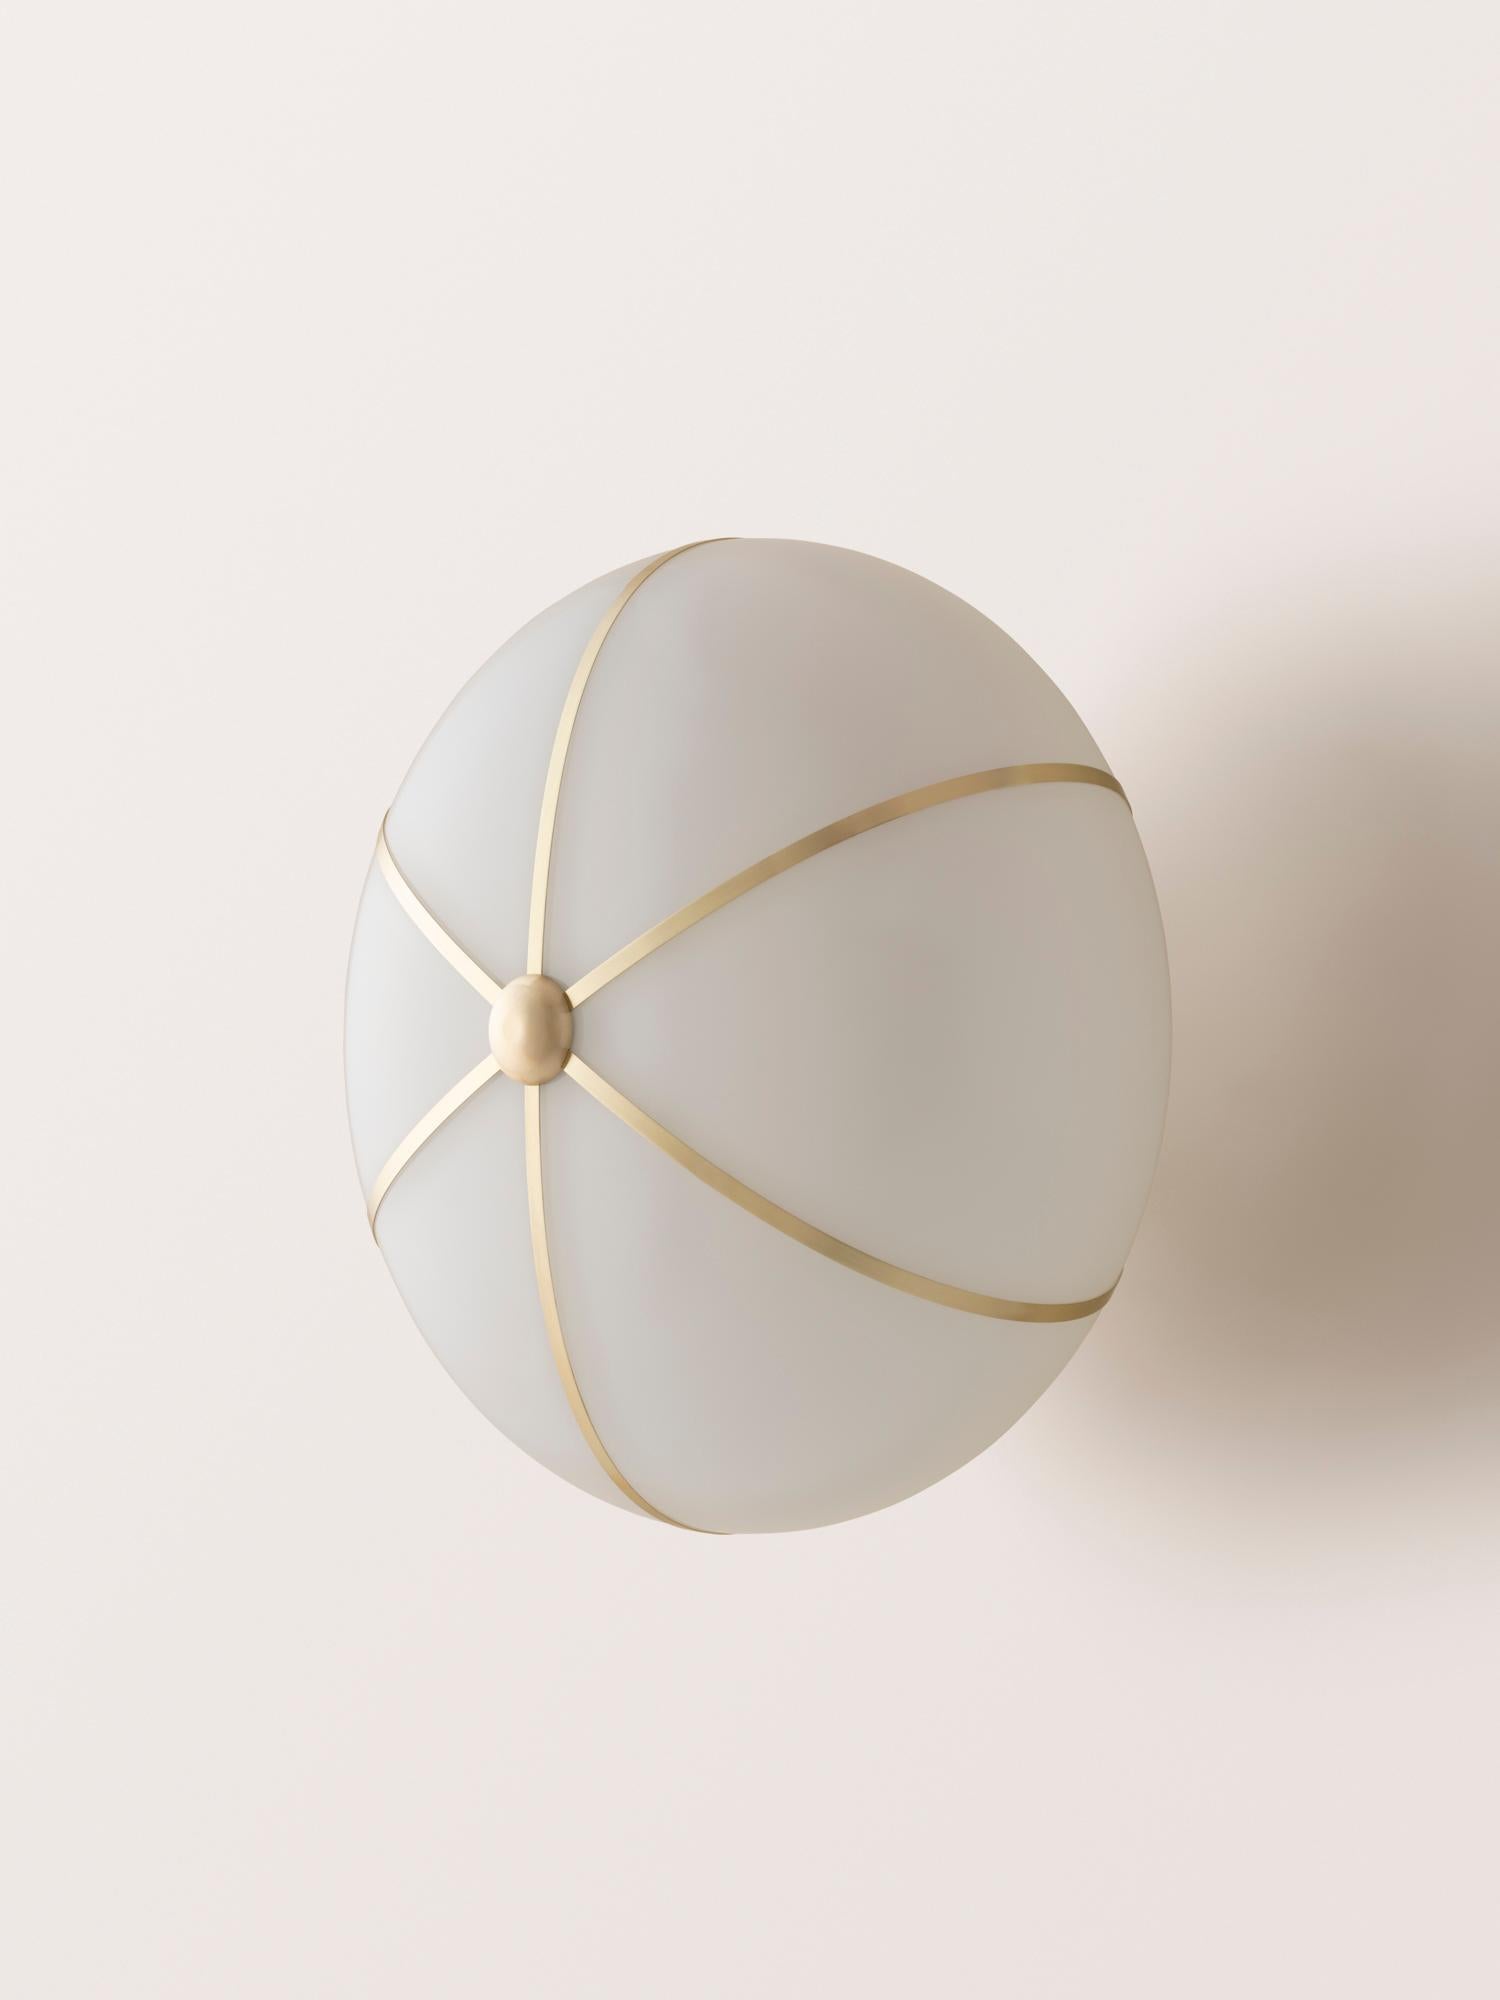 The Rib Sconce - Large Ellipse is blown in Italy and delicately framed by thin brass ribs.

This listing is priced in the satin brass finish. Please inquire for pricing of other finish options.
